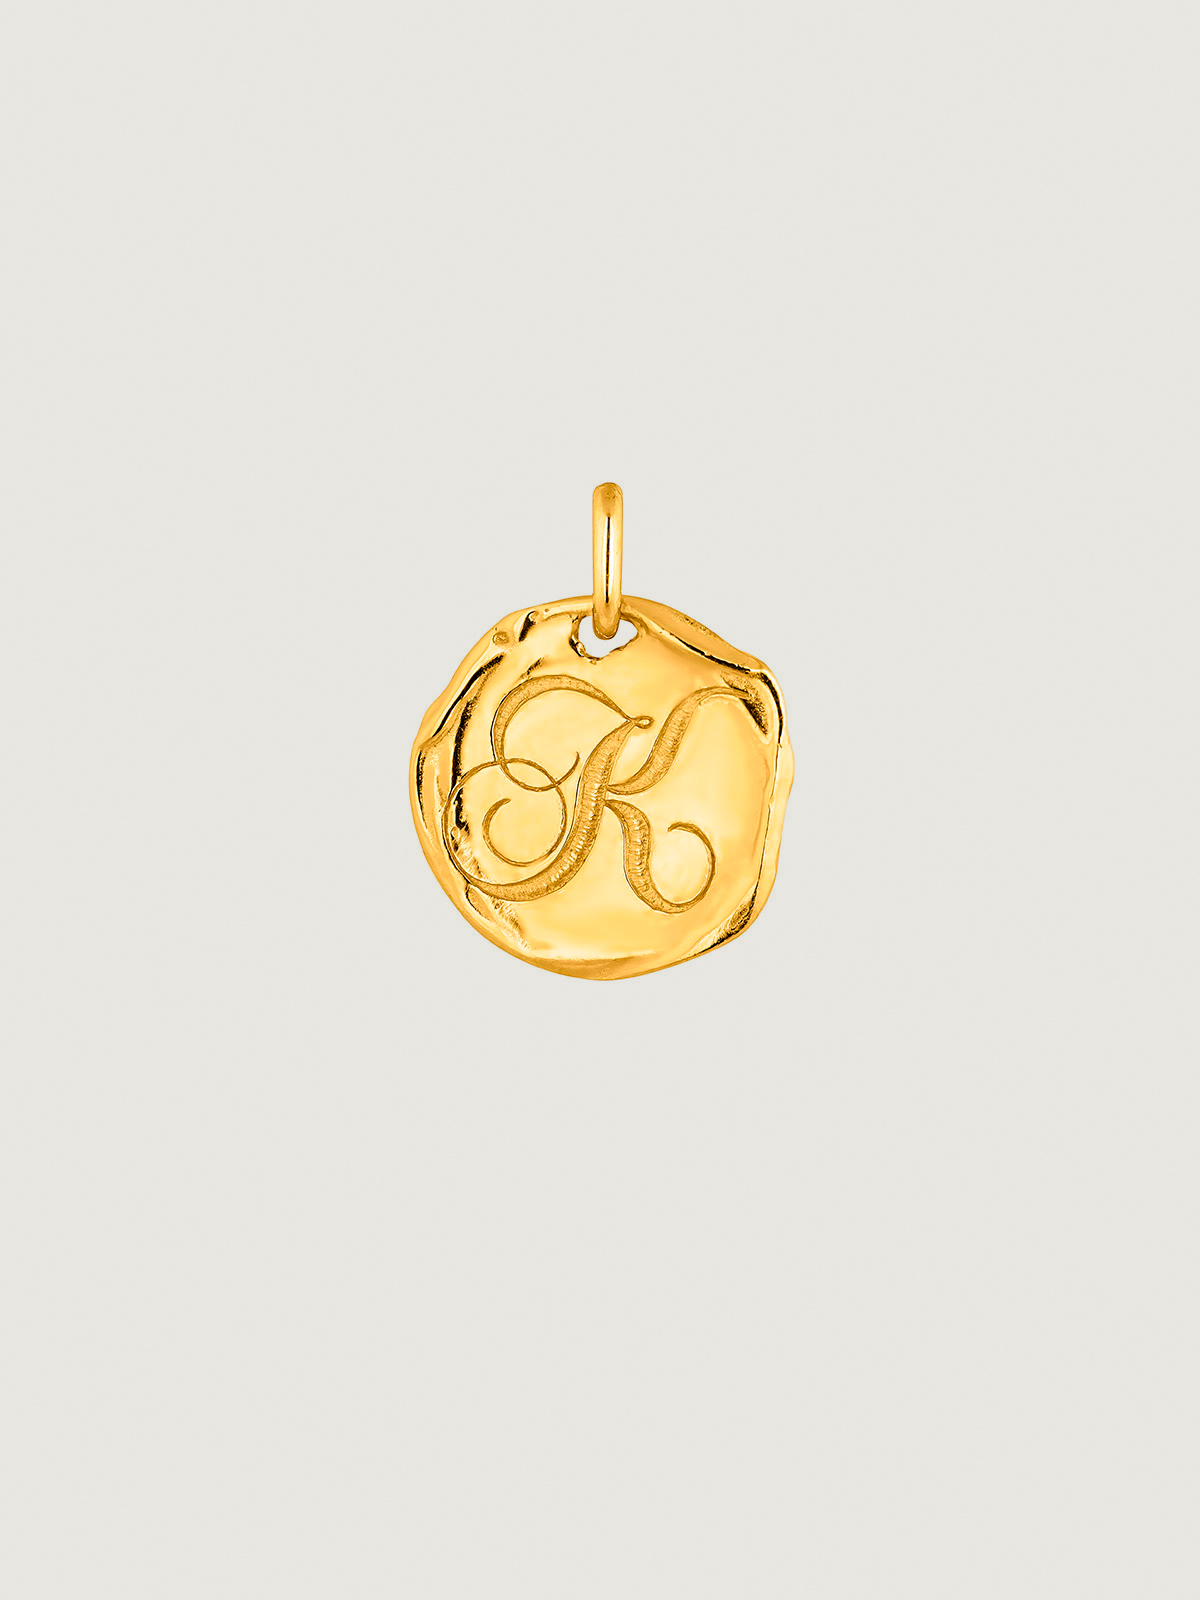 Handcrafted 925 silver charm, bathed in 18K yellow gold with initial K.